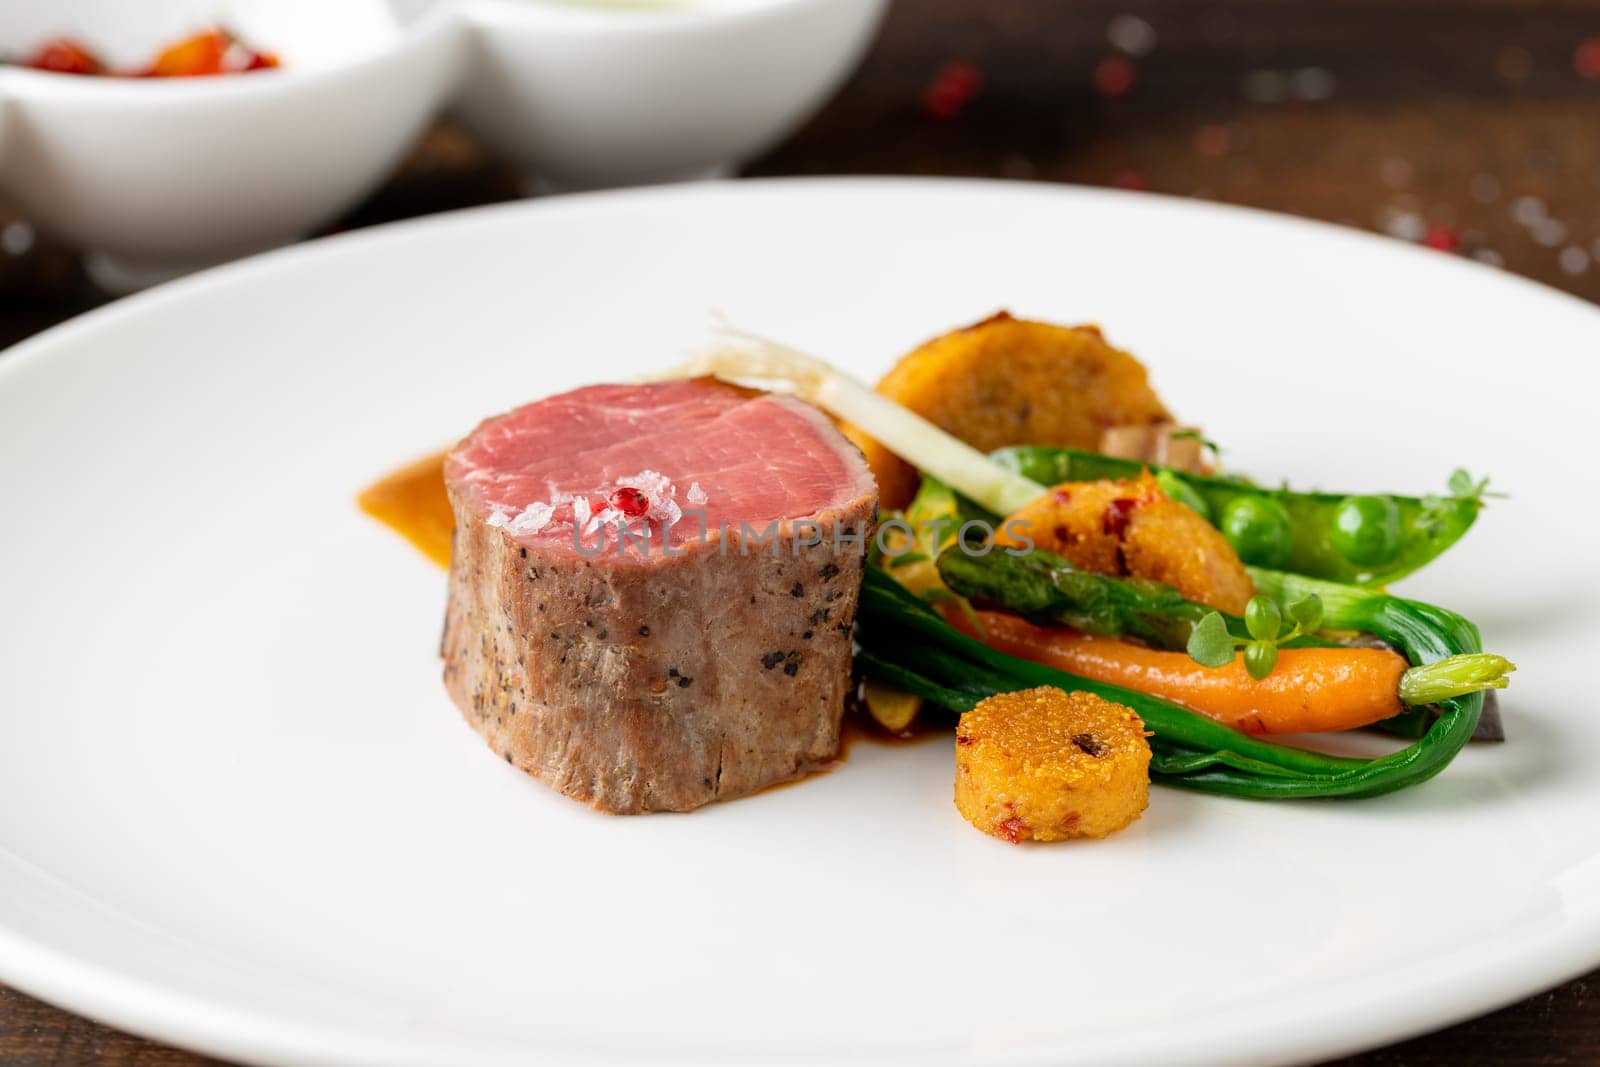 Filet mignon served with vegetables and sauces at a fine dining restaurant